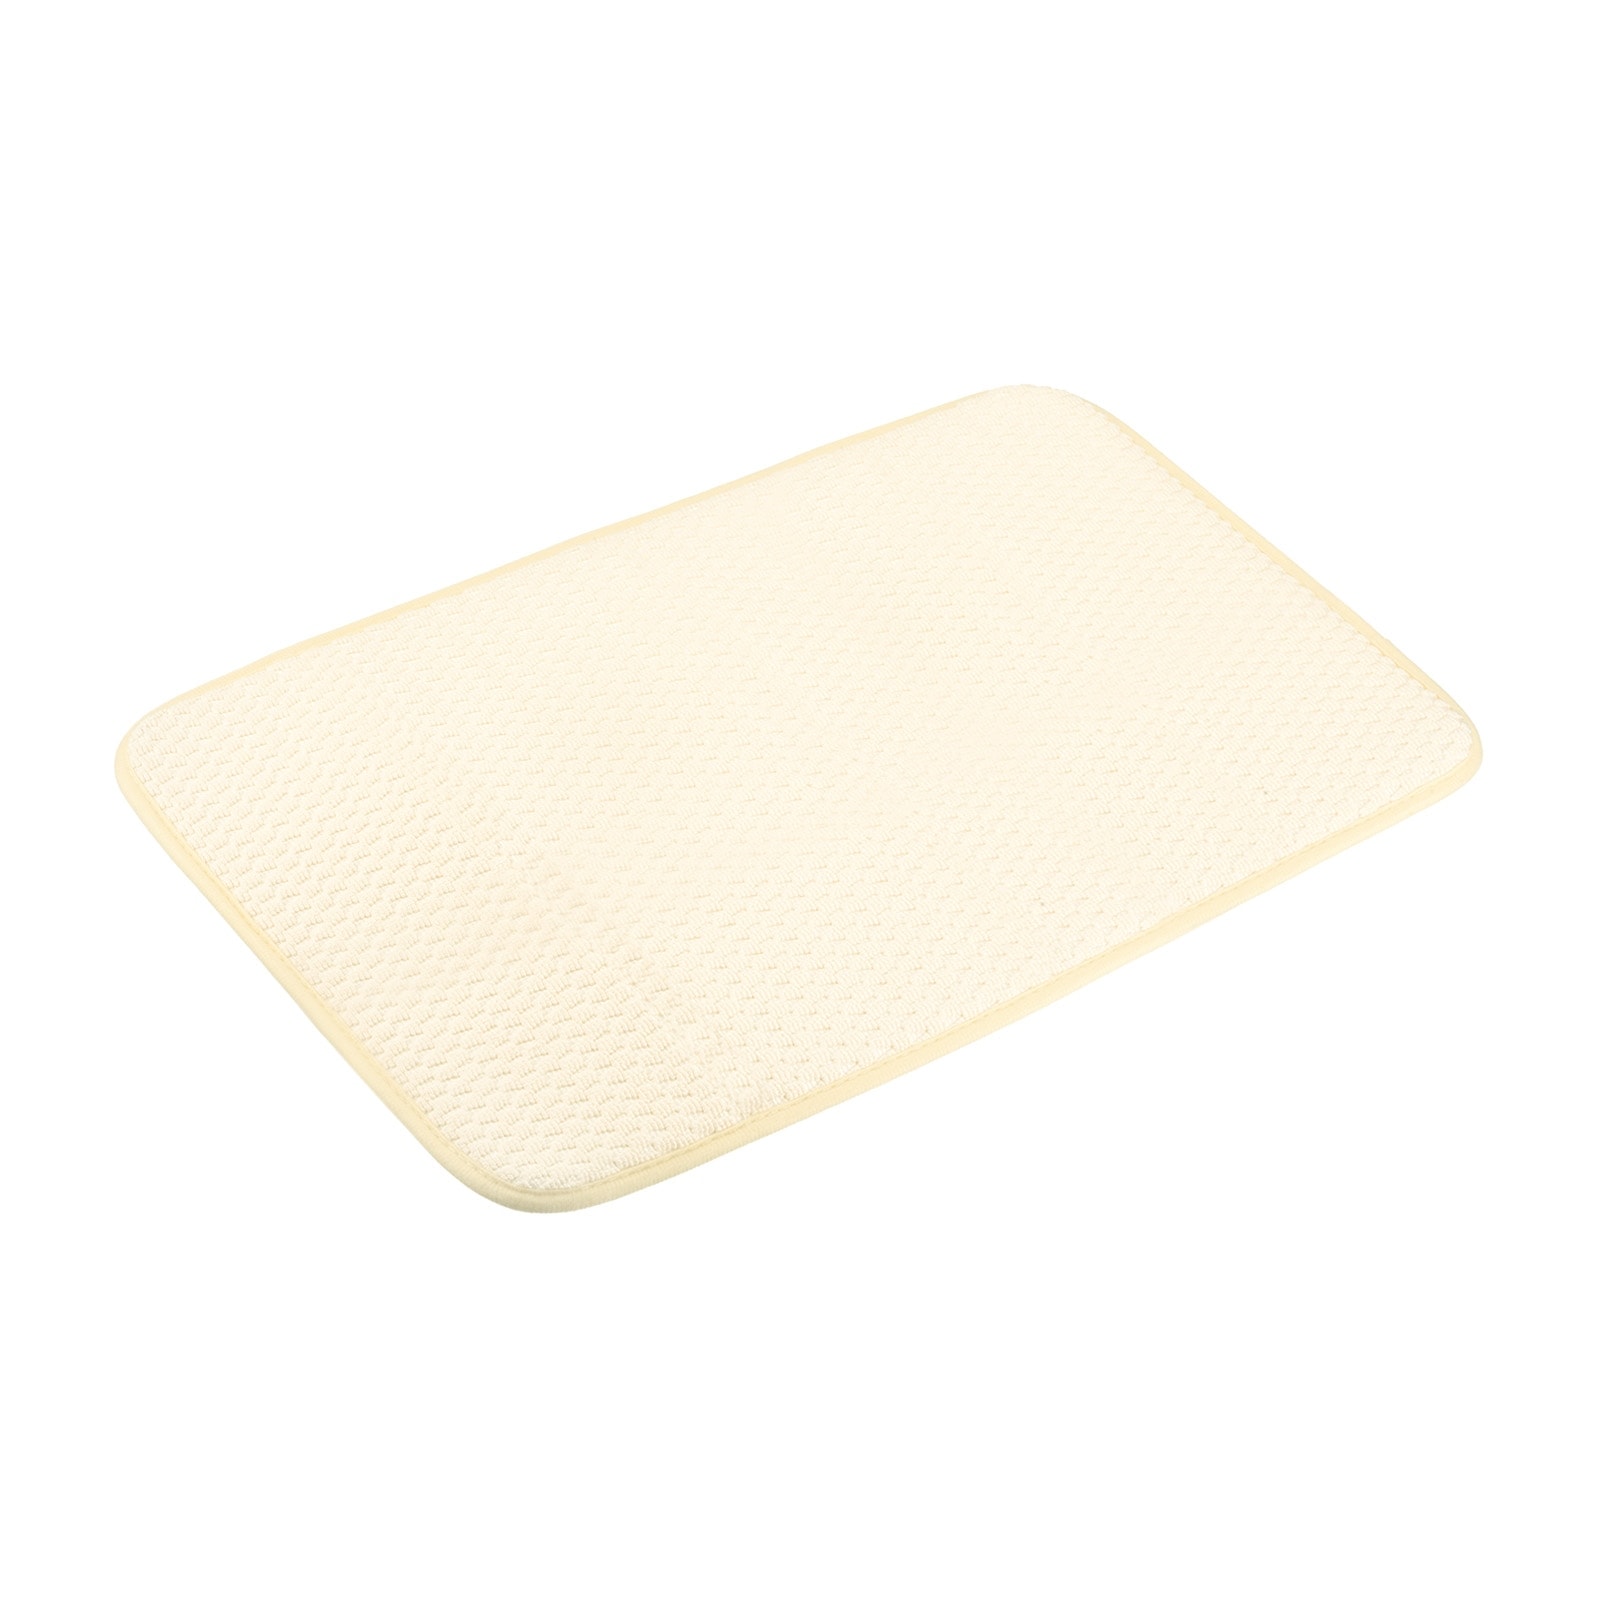 https://ak1.ostkcdn.com/images/products/is/images/direct/d9e05652855fcdcb04a9942df738a9638f999e05/Reversible-Dish-Drying-Mat%2C-Microfiber-Dish-Draining-Mat-Place-Mat-Yellow.jpg